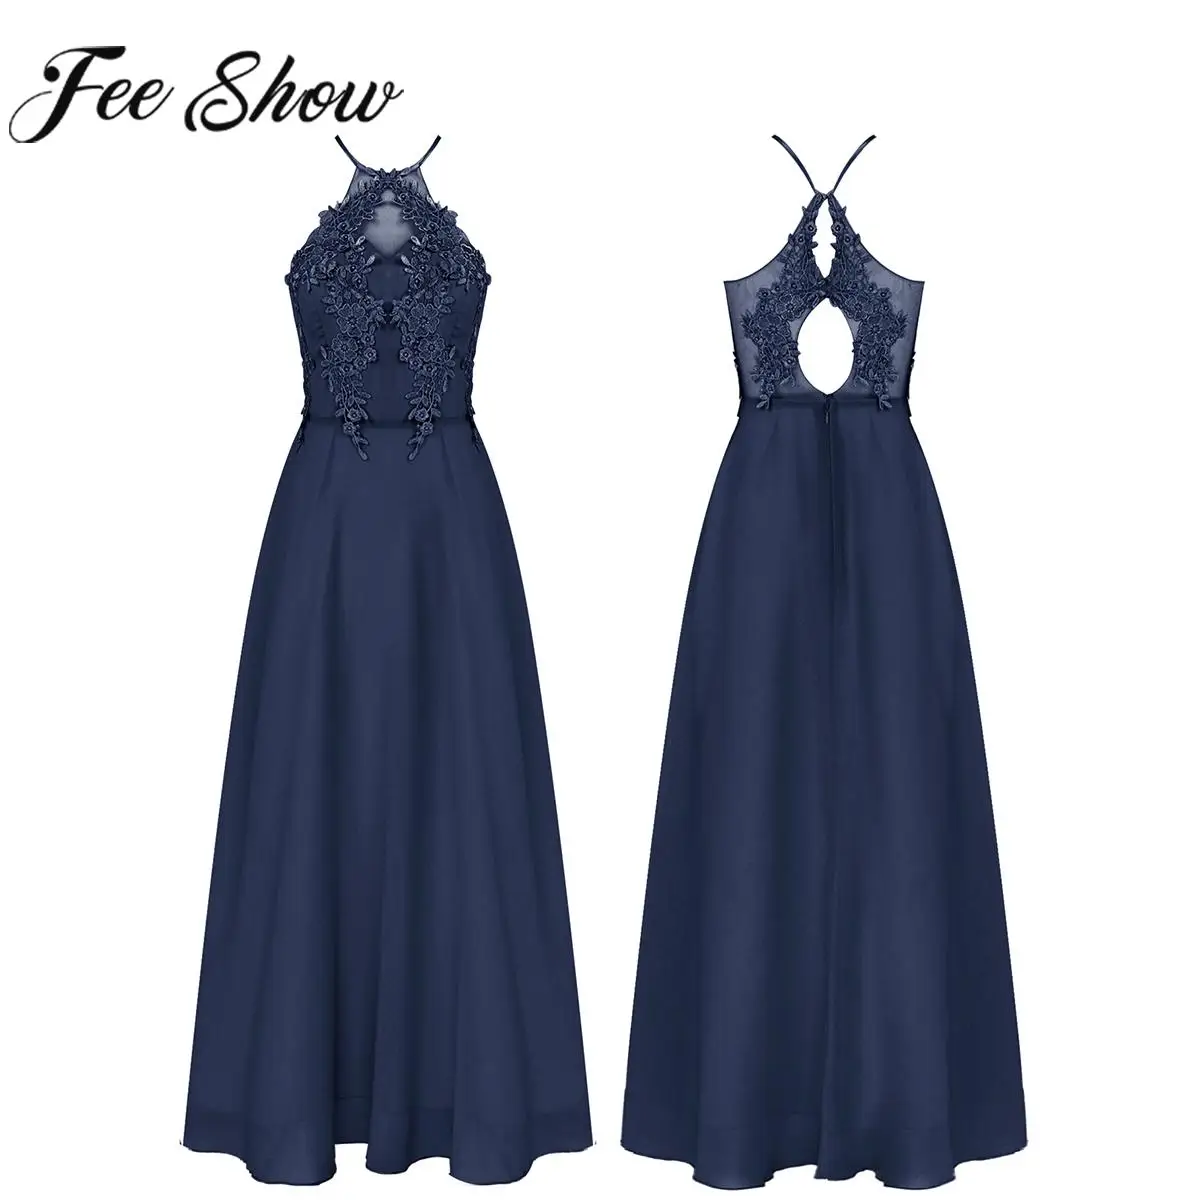 

Women Flower Embroidery Chiffon Party Dress Bridesmaid Costume Sleeveless Halter Hollow Out Built-in Bra Maxi Dress for Wedding